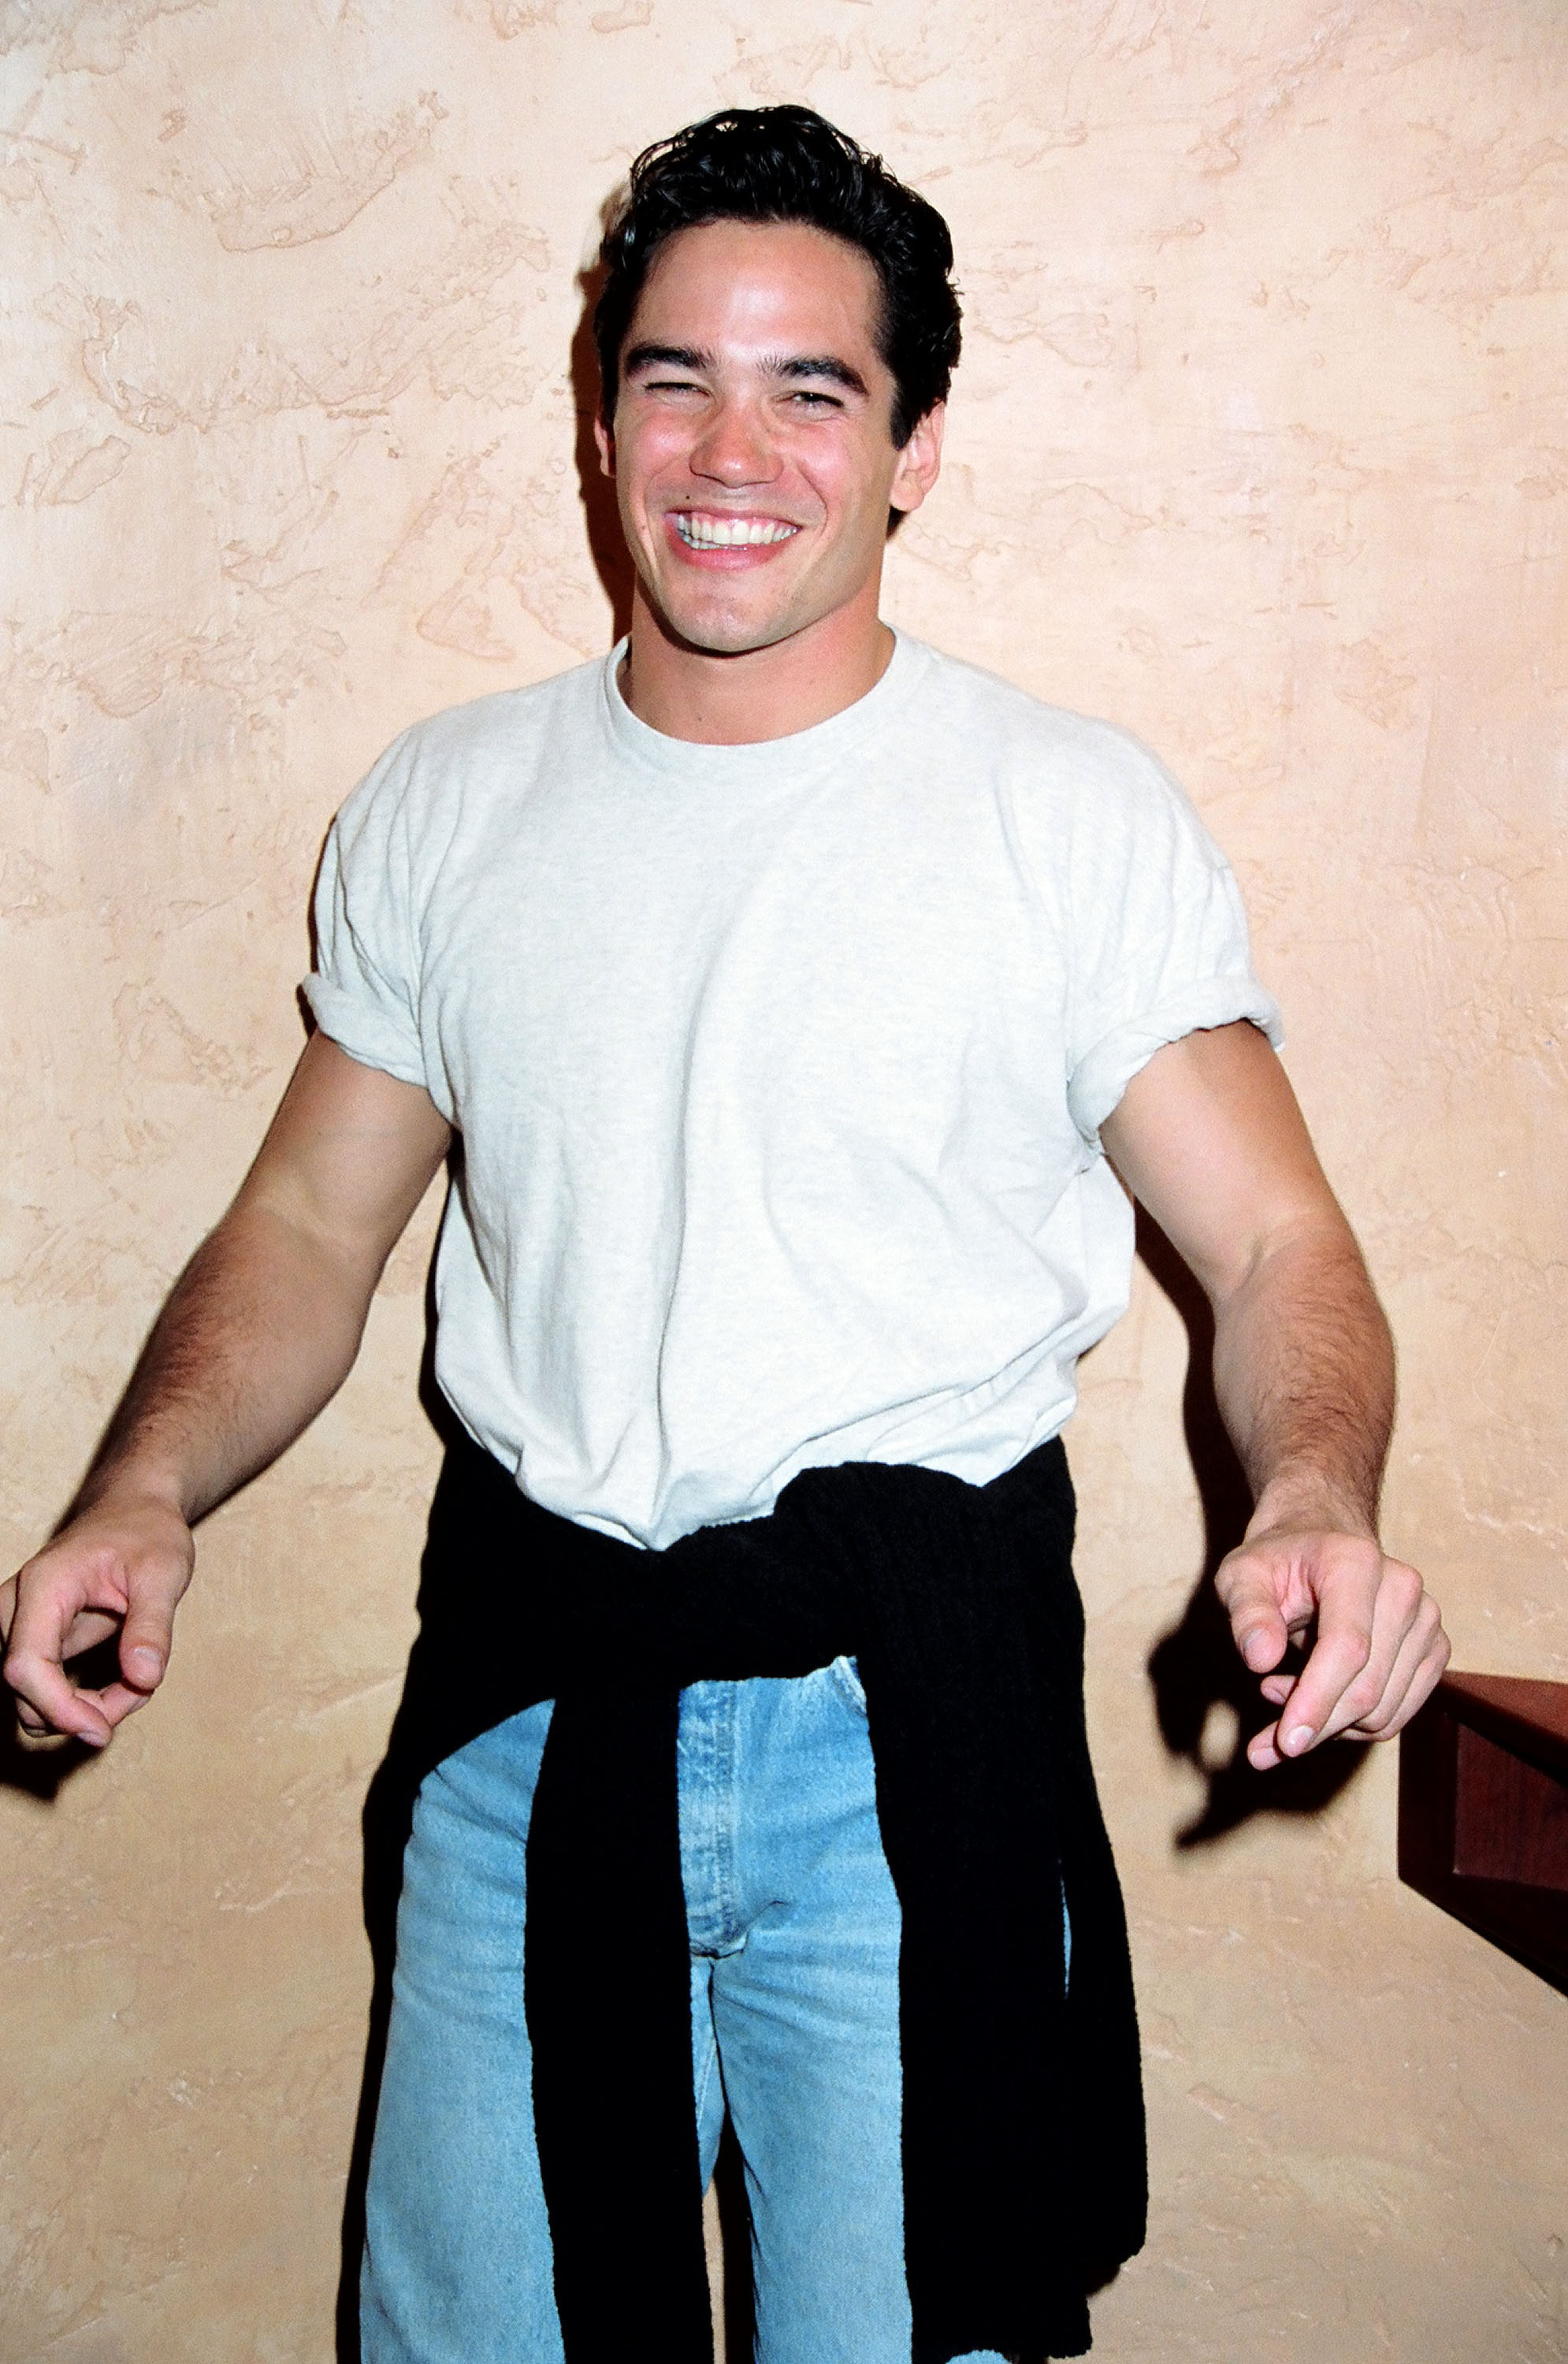 Dean Cain at MTV's 3rd Annual Rock N' Jock basketball event in Los Angeles, California in 1993 | Source: Getty Images